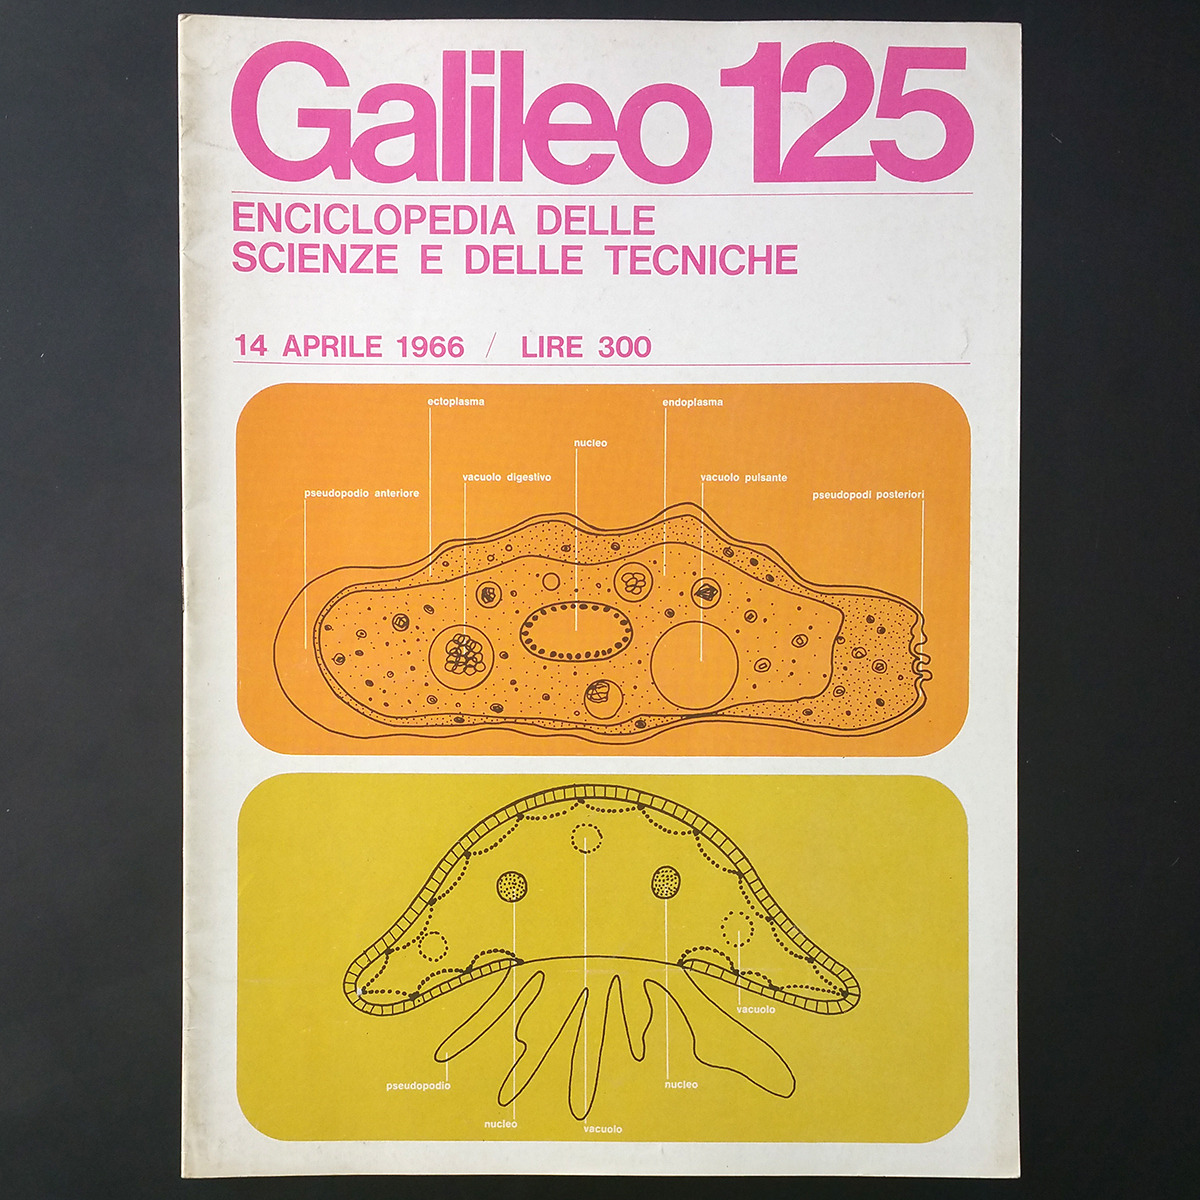 1963 covers of the Italian science magazine Galileo, designed by Massimo Vignelli. More at @VignelliCenter

vignellicenter.tumblr.com/search/Galileo